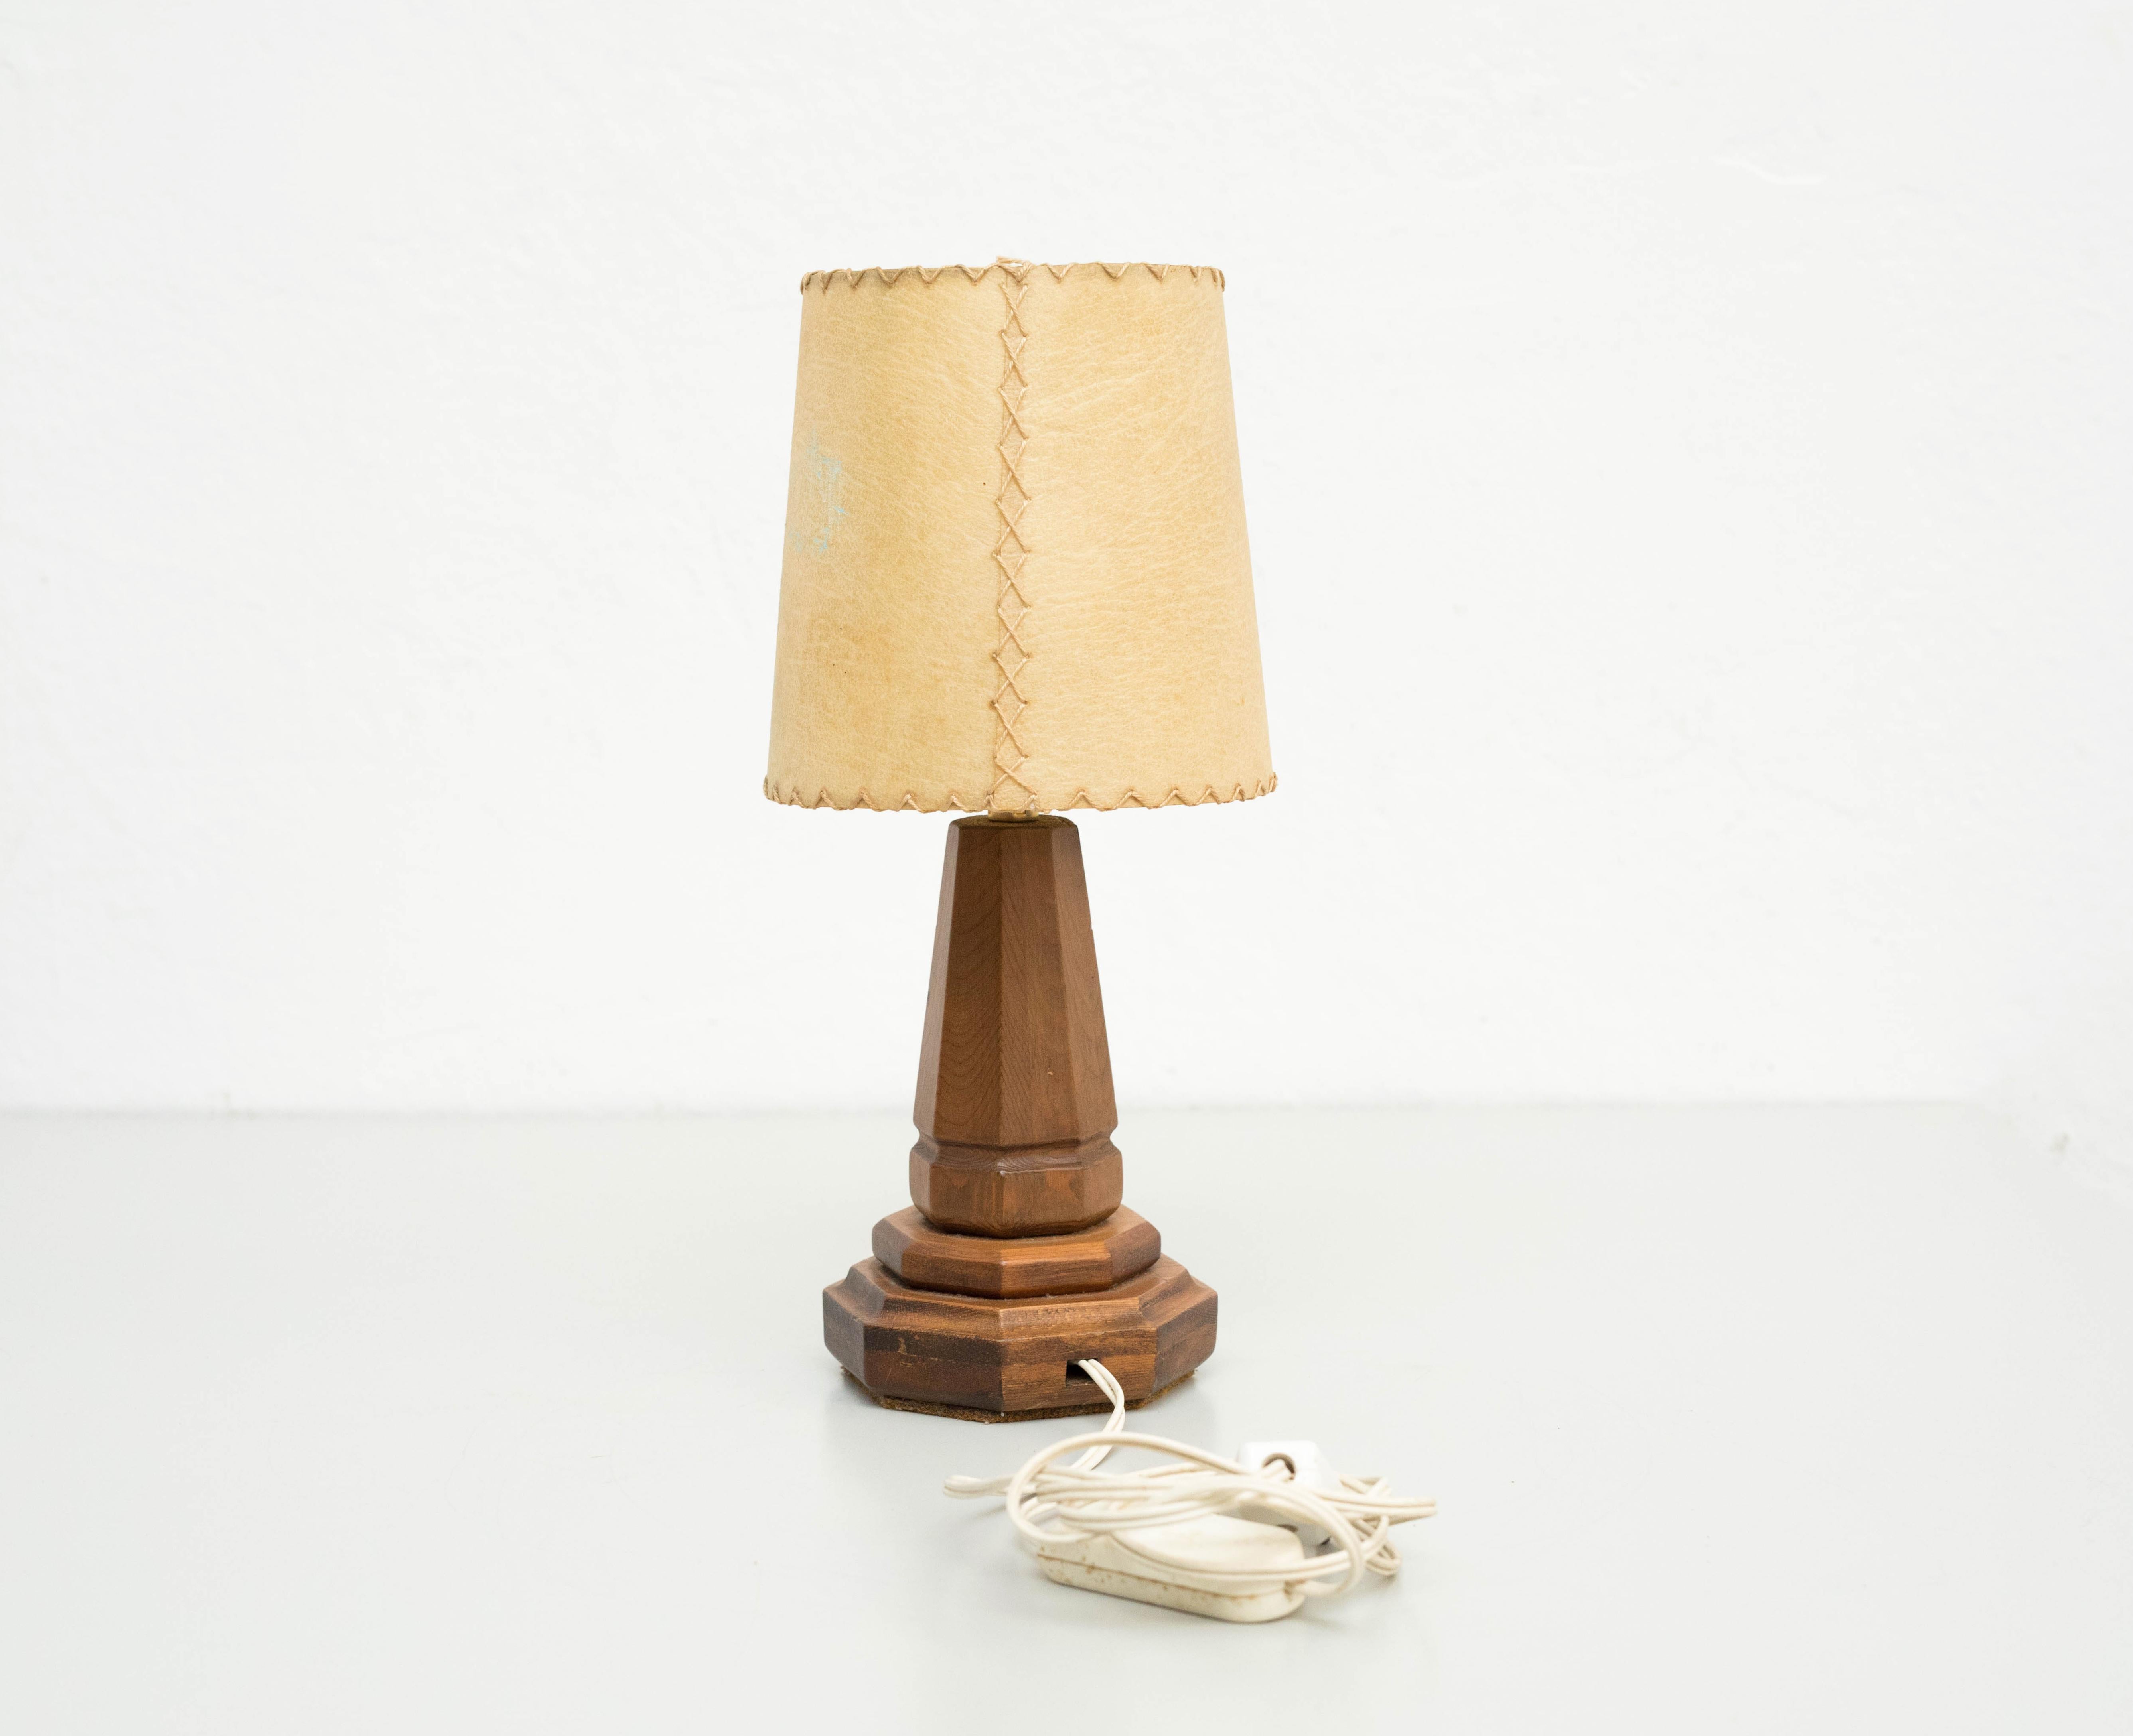 Table lamp, Wood, Circa 1950.

In original condition, wear consistent with age and use, preserving a beautiful patina.

Materials:
Wood

Dimensions:
ø 13.5 cm x H 33.5 cm.